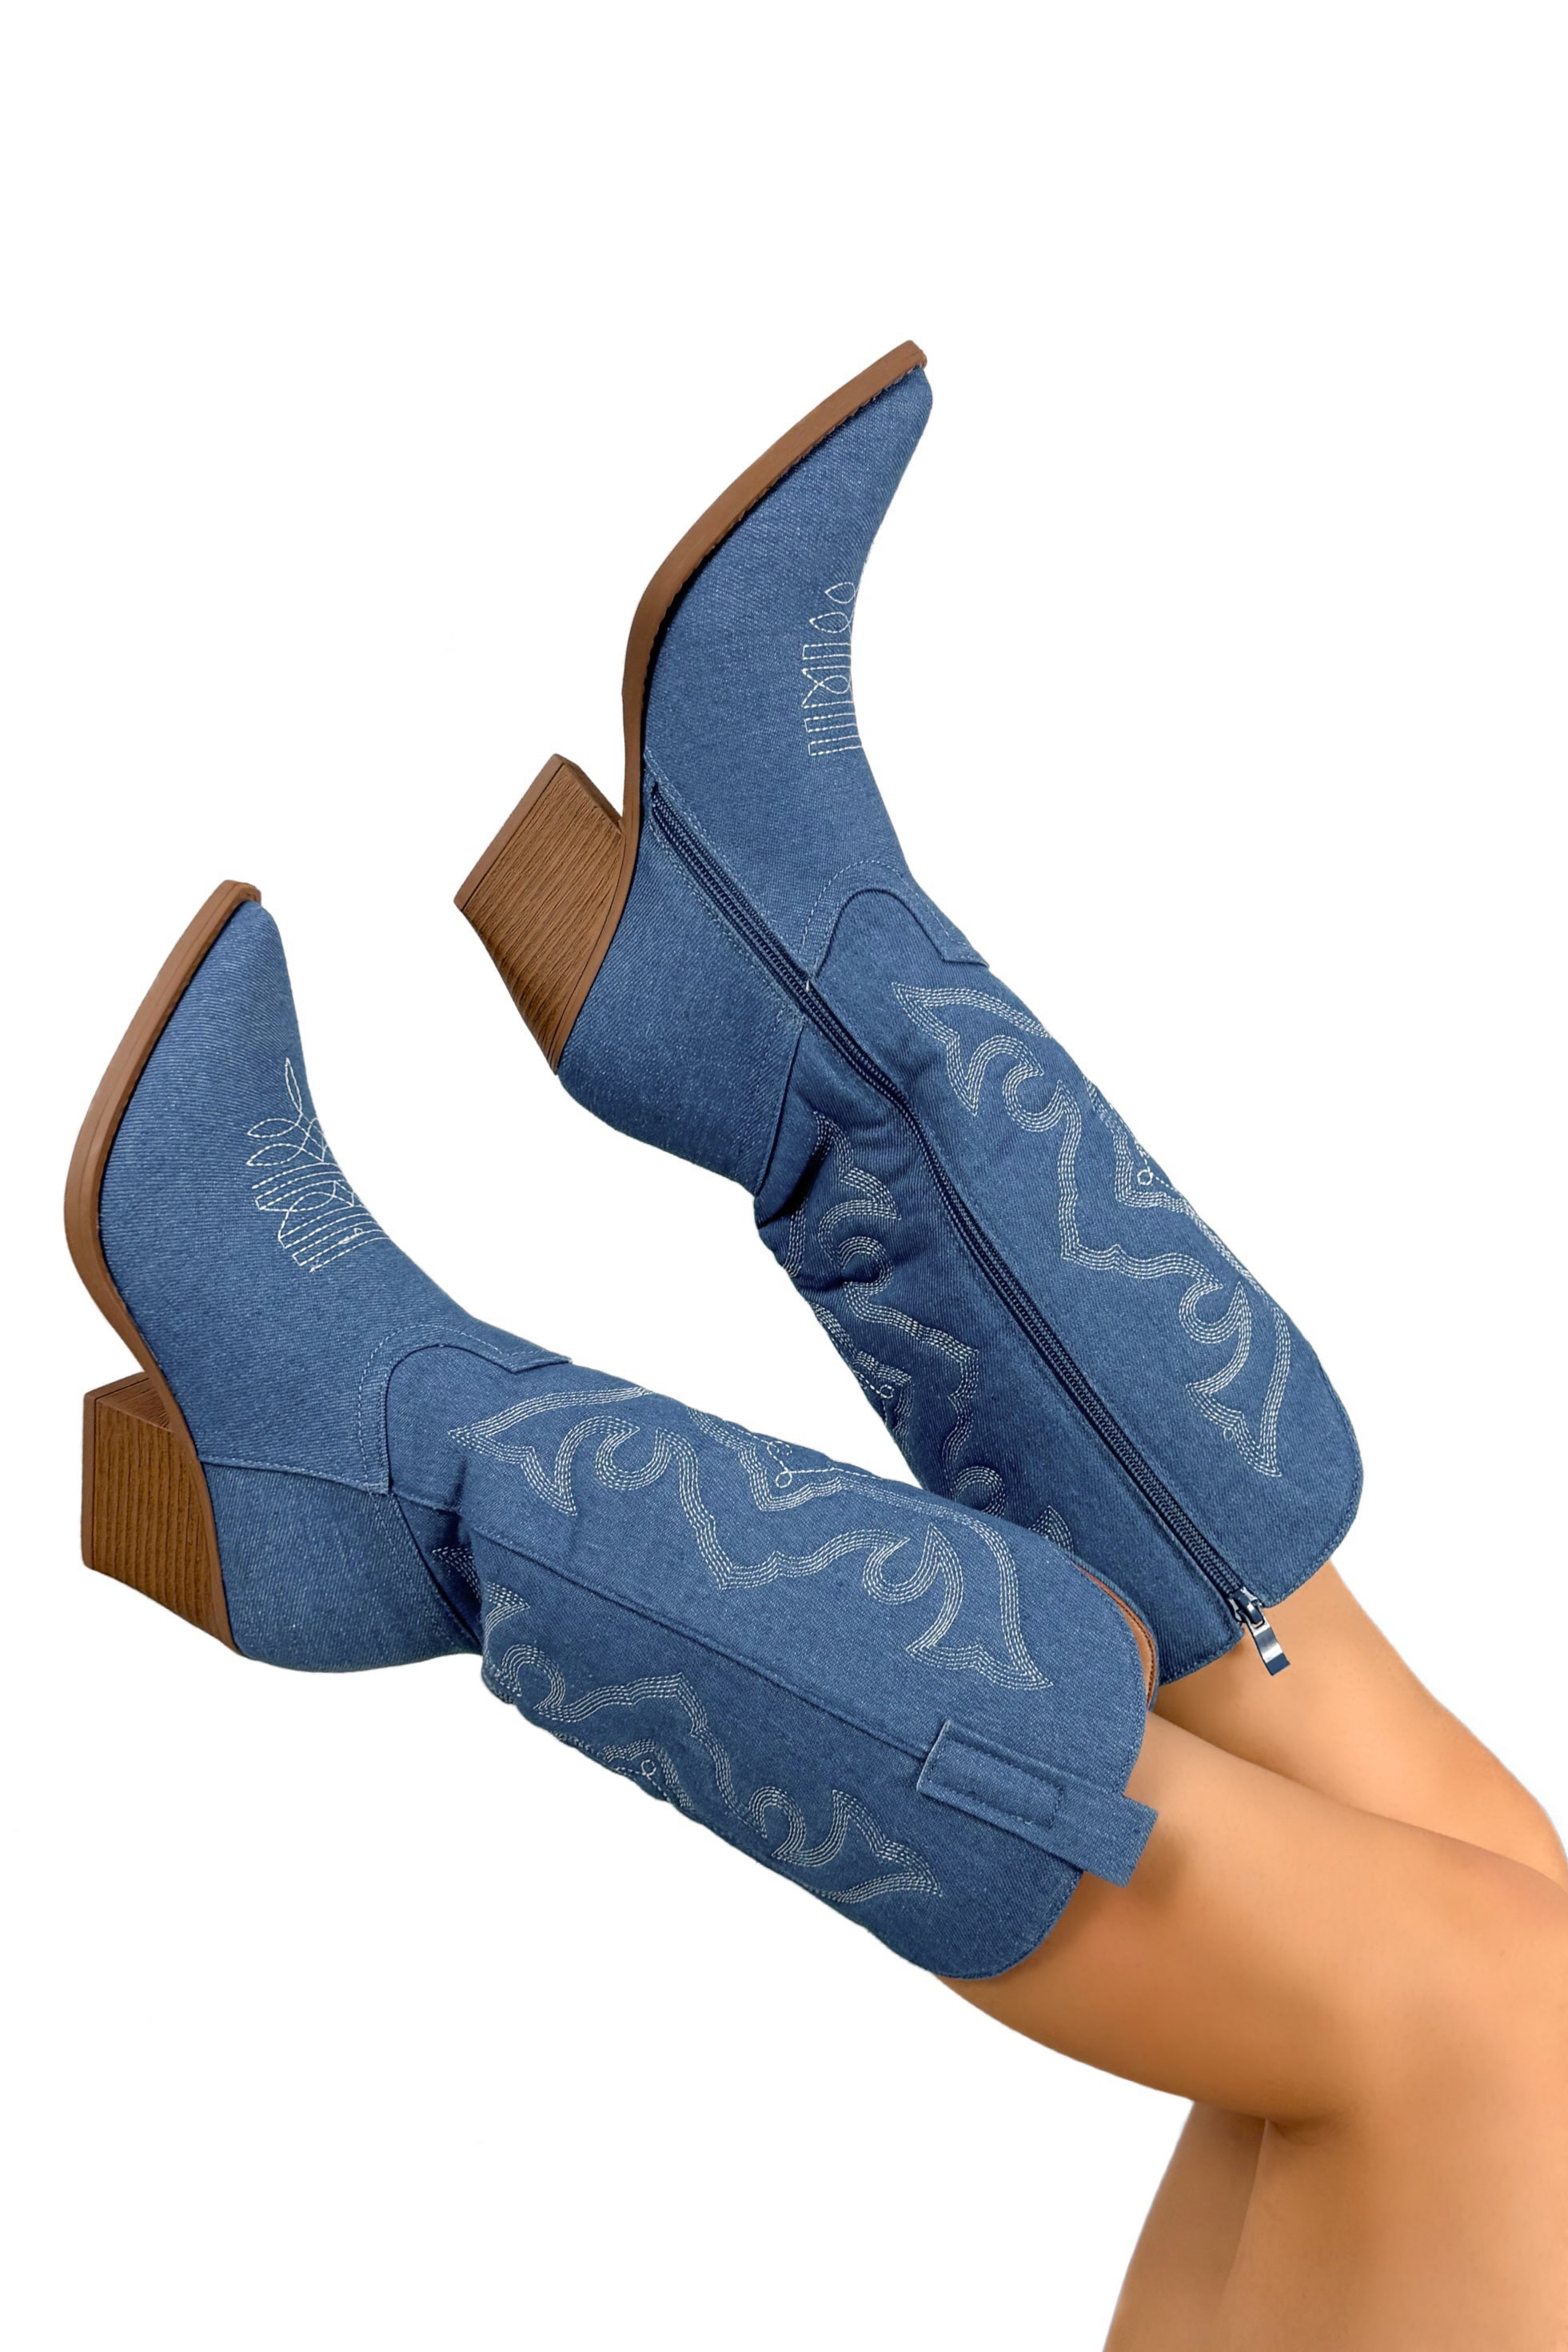 Blue Jean Baby Cowgirl Boots - Frock Candy